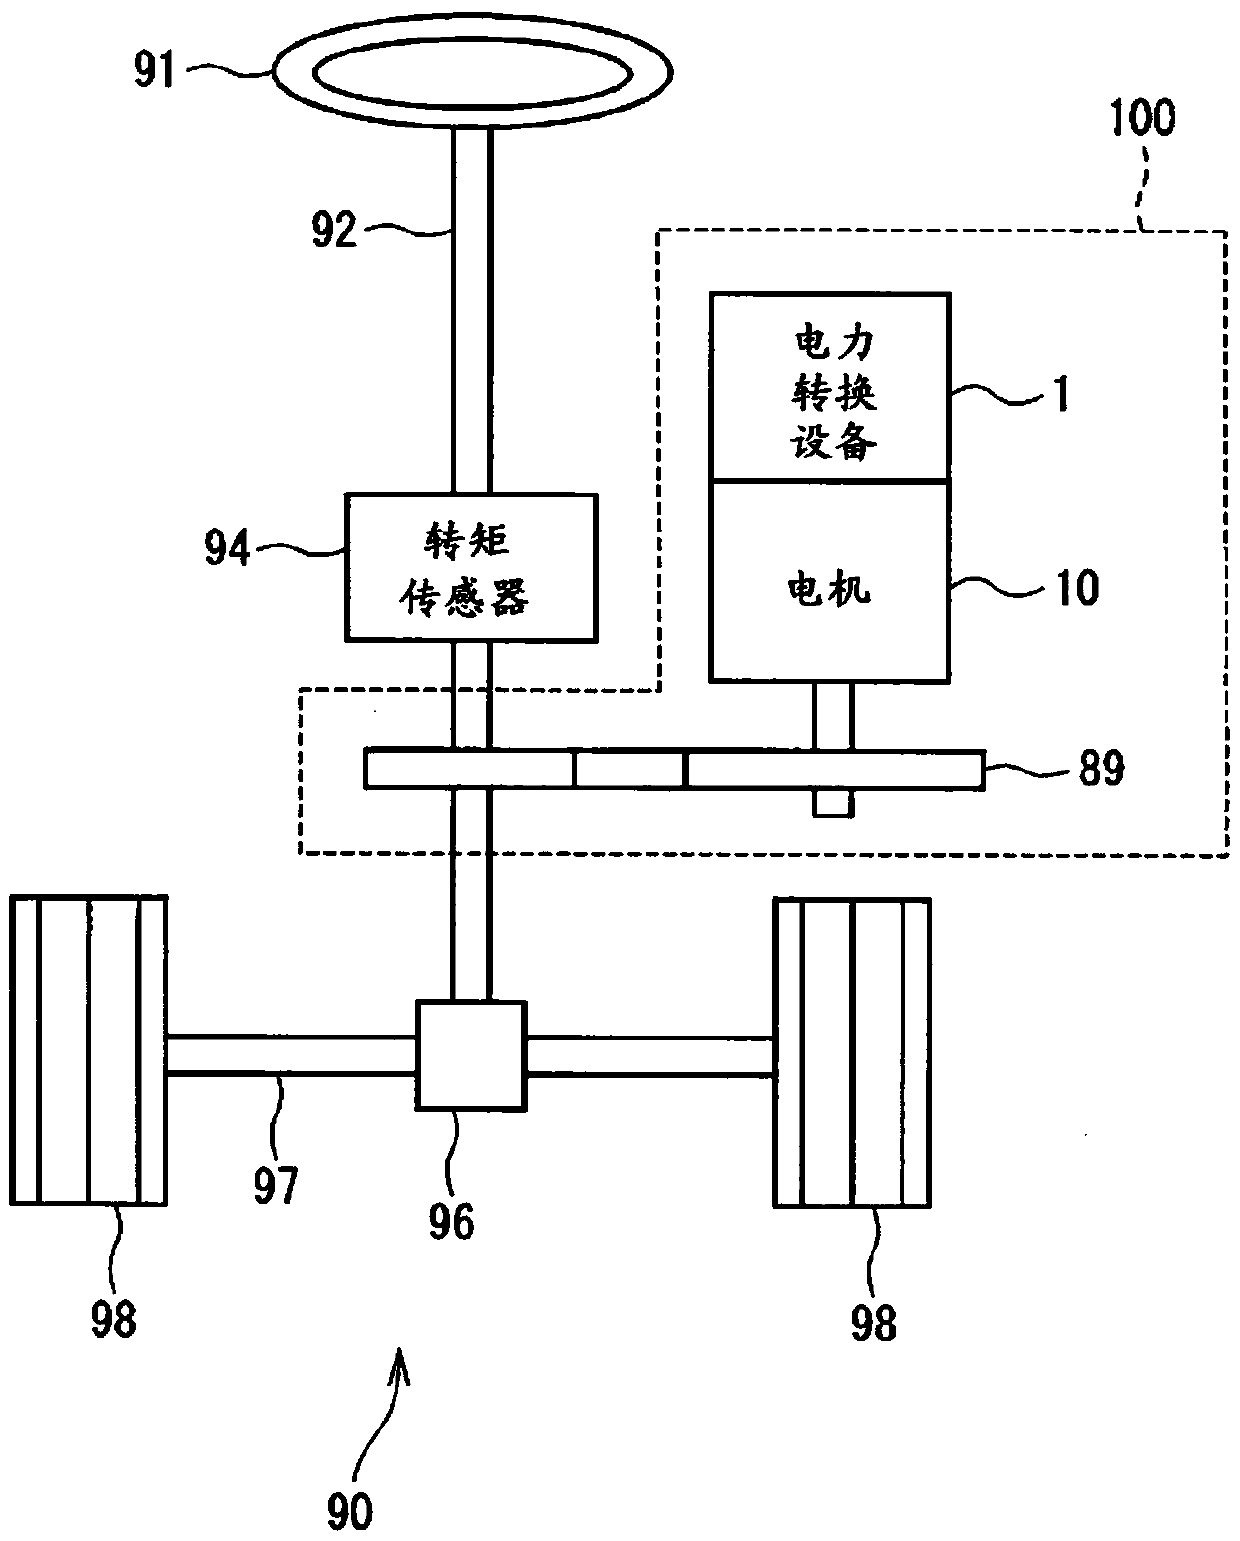 Power conversion equipment and electric power steering equipment having power conversion equipment